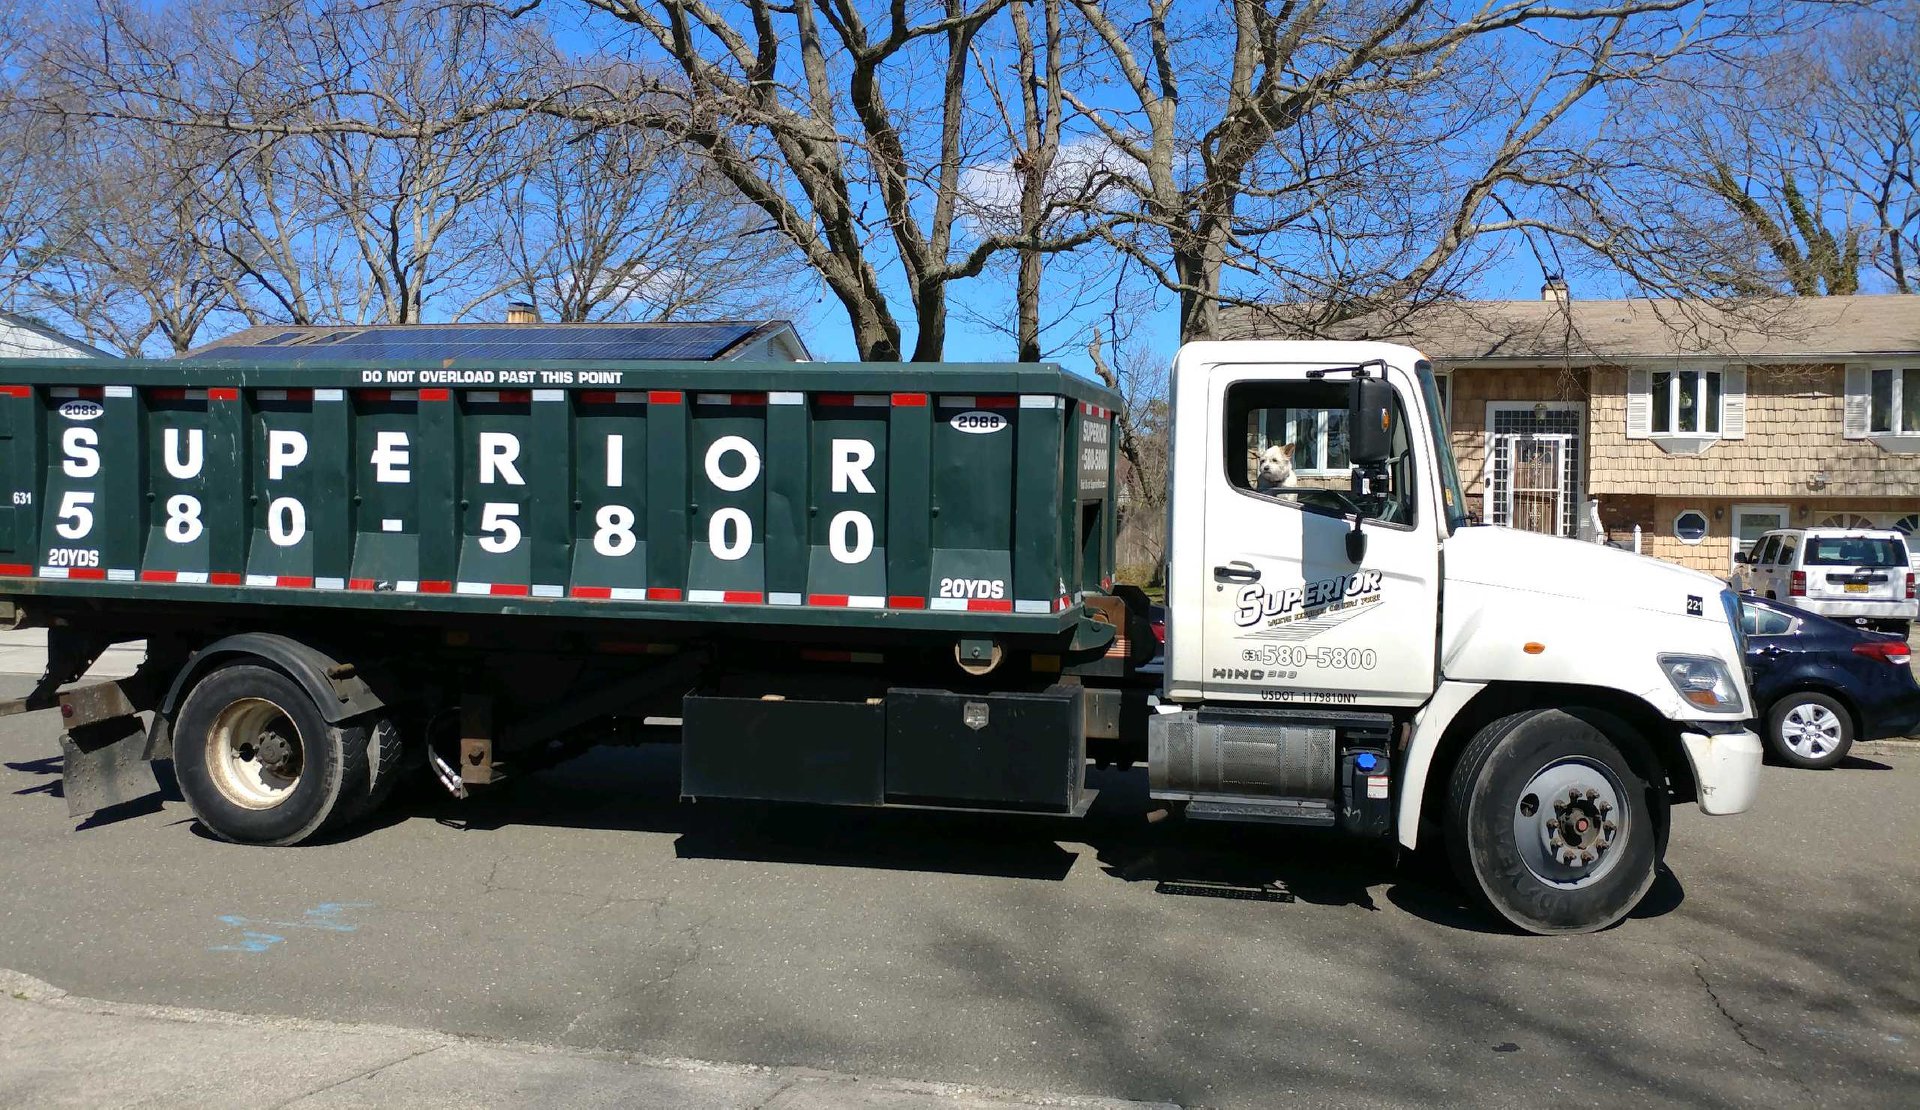 Superior Waste Services of New York